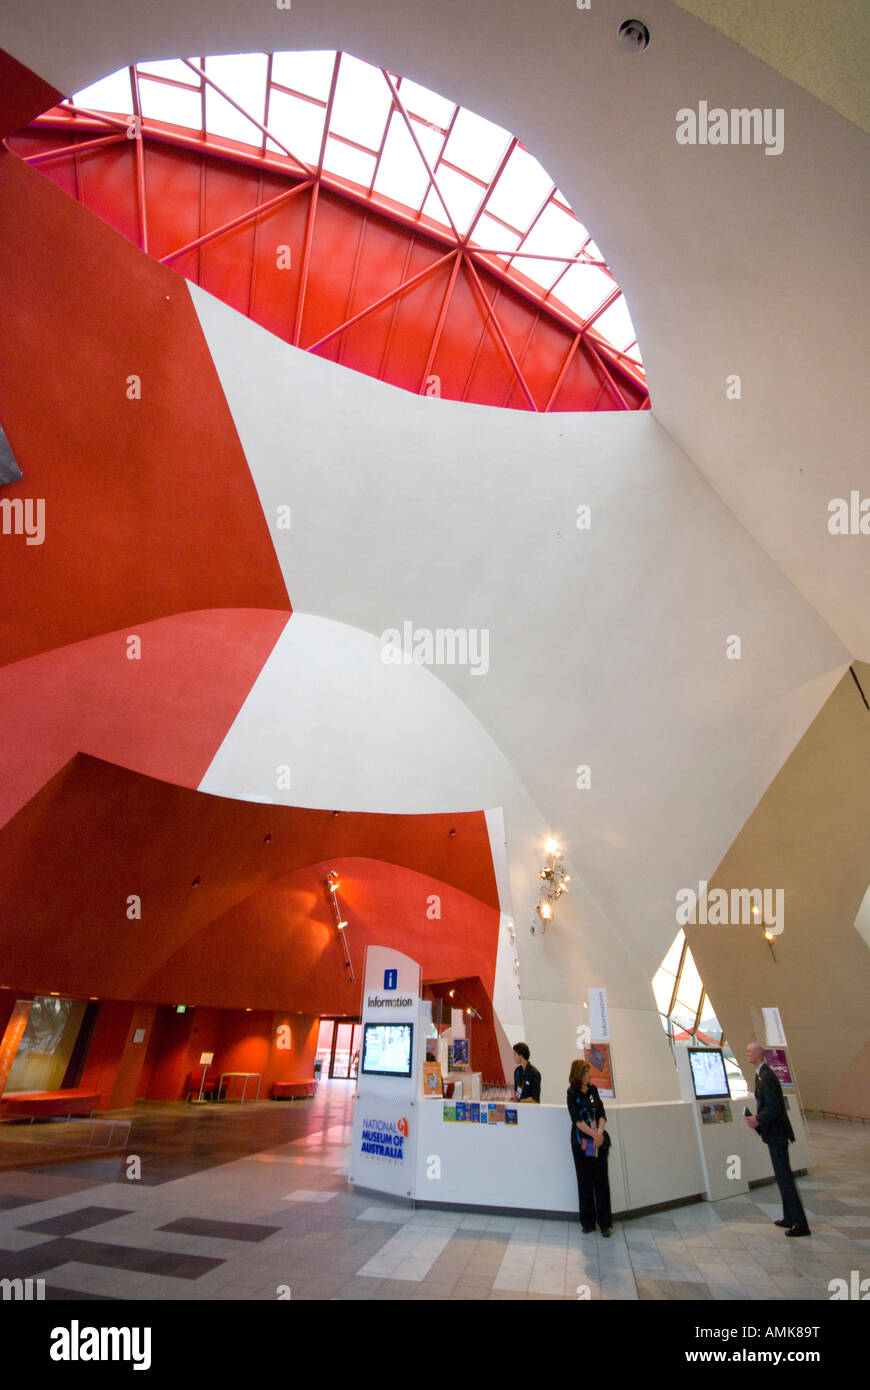 Interior of the National Museum of Australia in Canberra Stock Photo